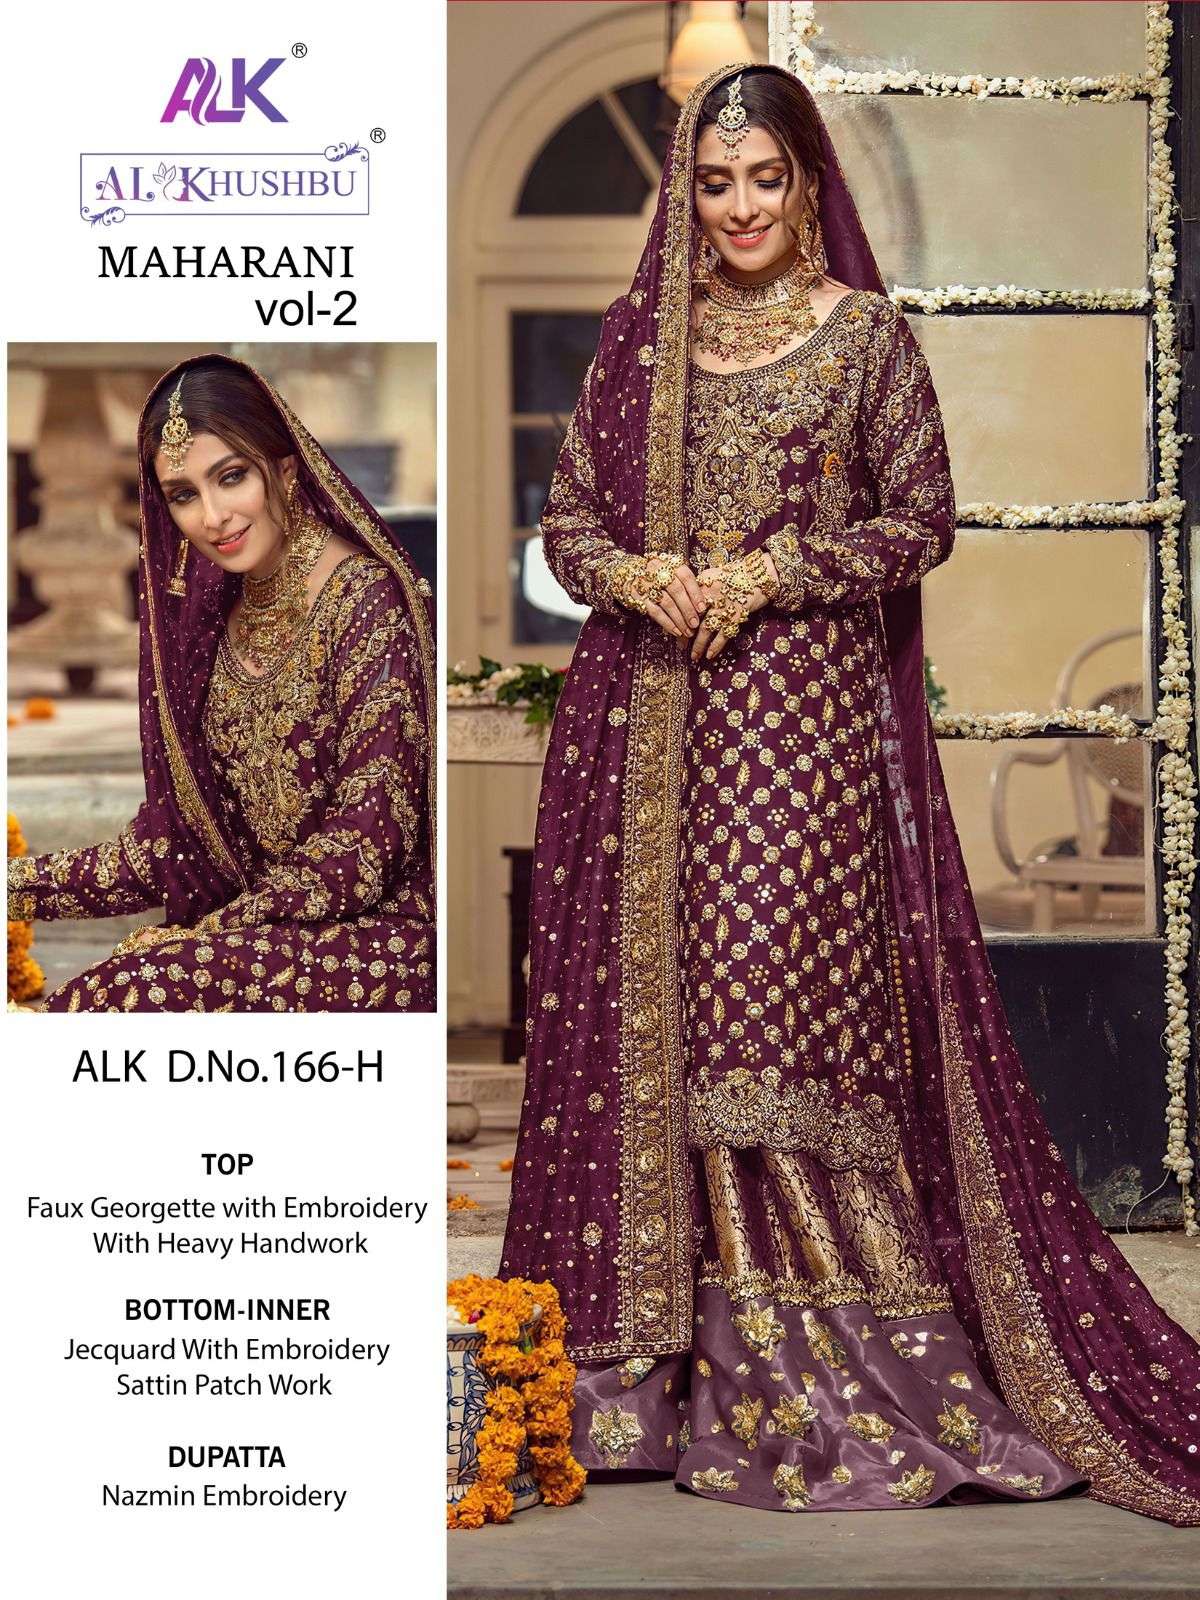 AL KHUSHBU MAHARANI VOL 2 FAUX GEORGETTE EMBROIDERED SUITS A...